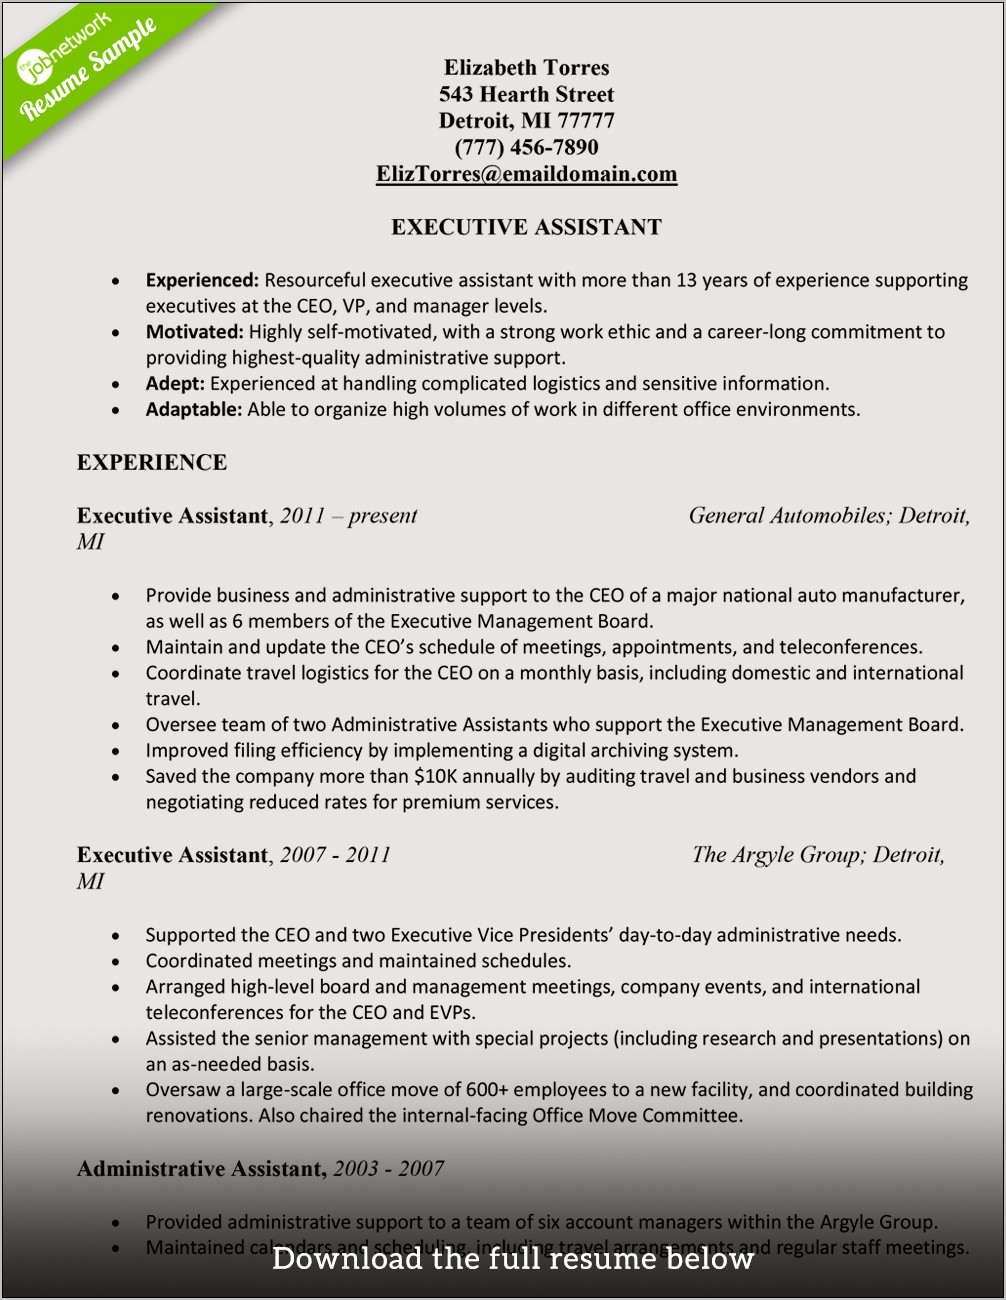 Resume Headline For Assistant Manager